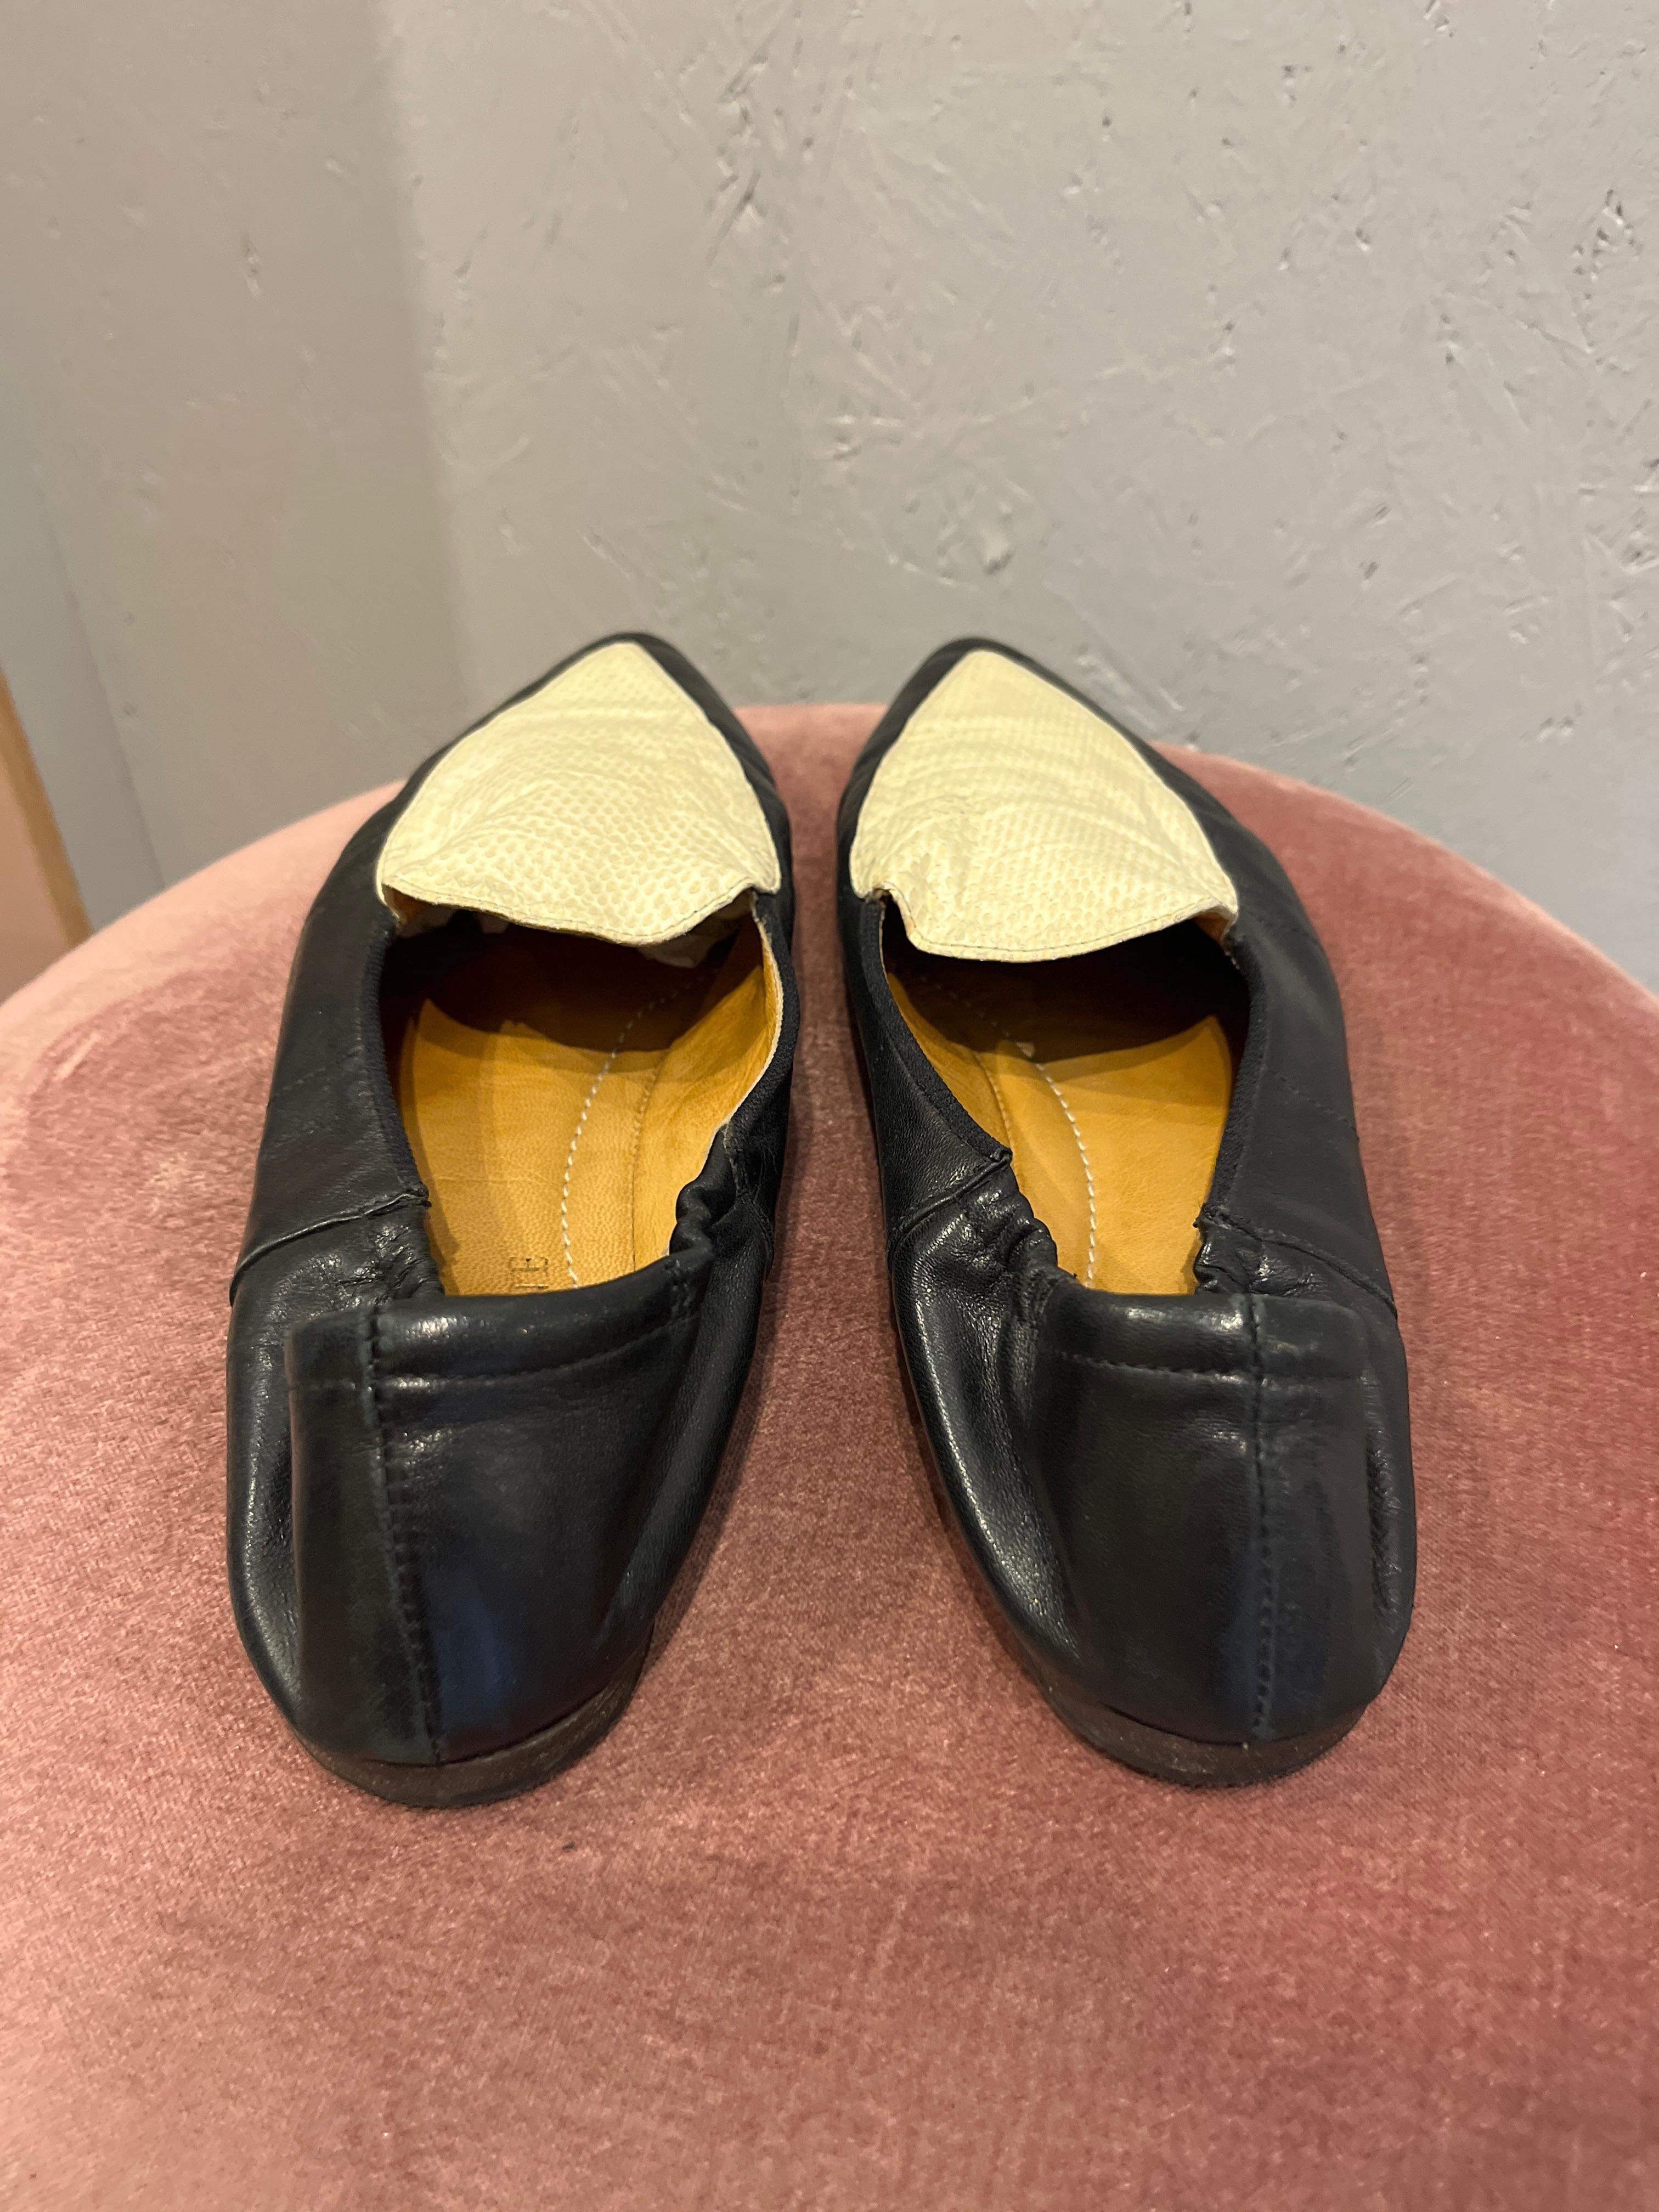 Notabene - Loafers - Size: 38 1/2